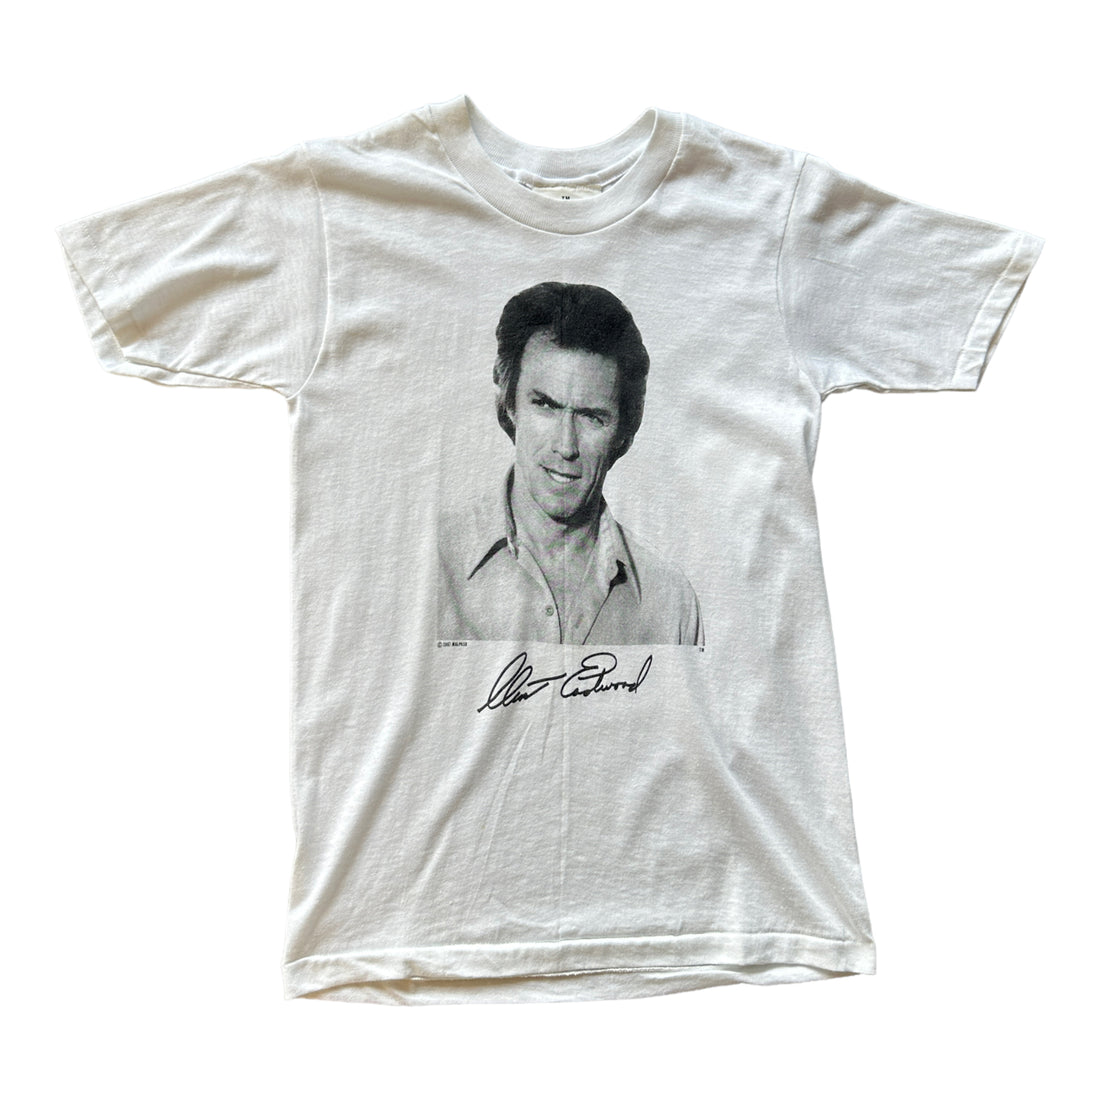 1987 CLINT EASTWOOD T-SHIRT WHITE ‘SMALL’ - 1980S